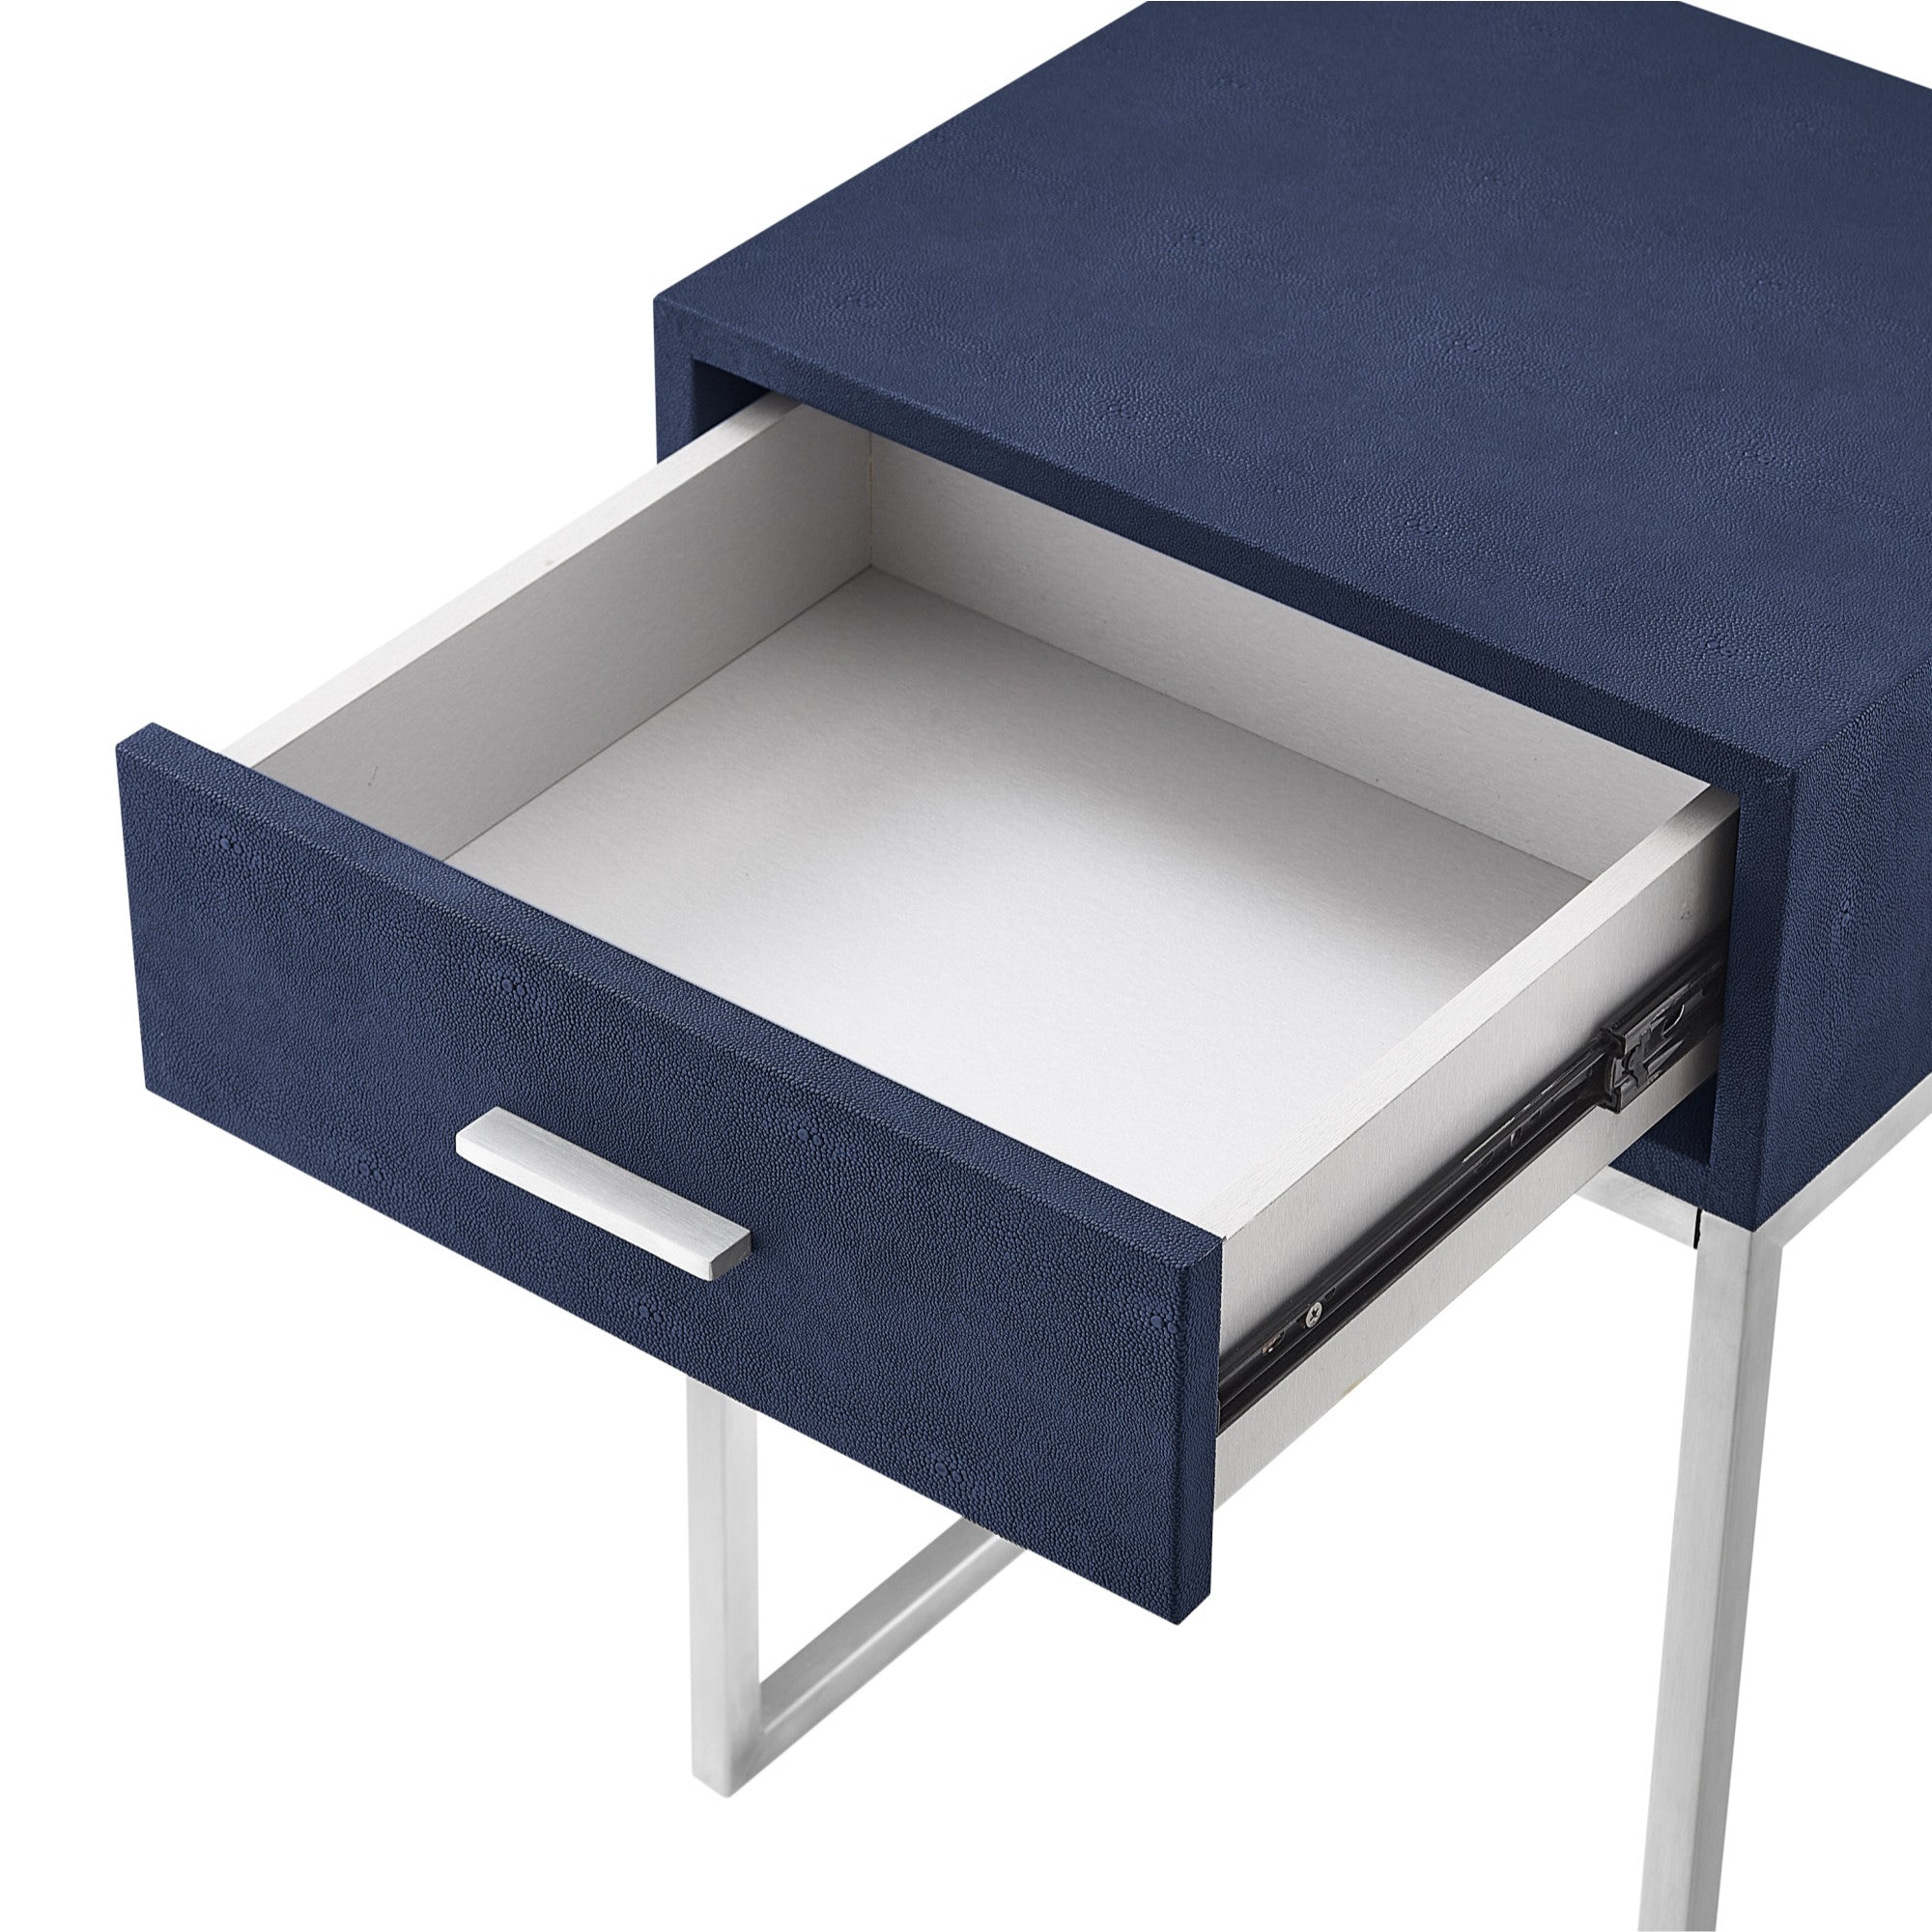 24" Silver Metallic and Navy Blue End Table with Drawer